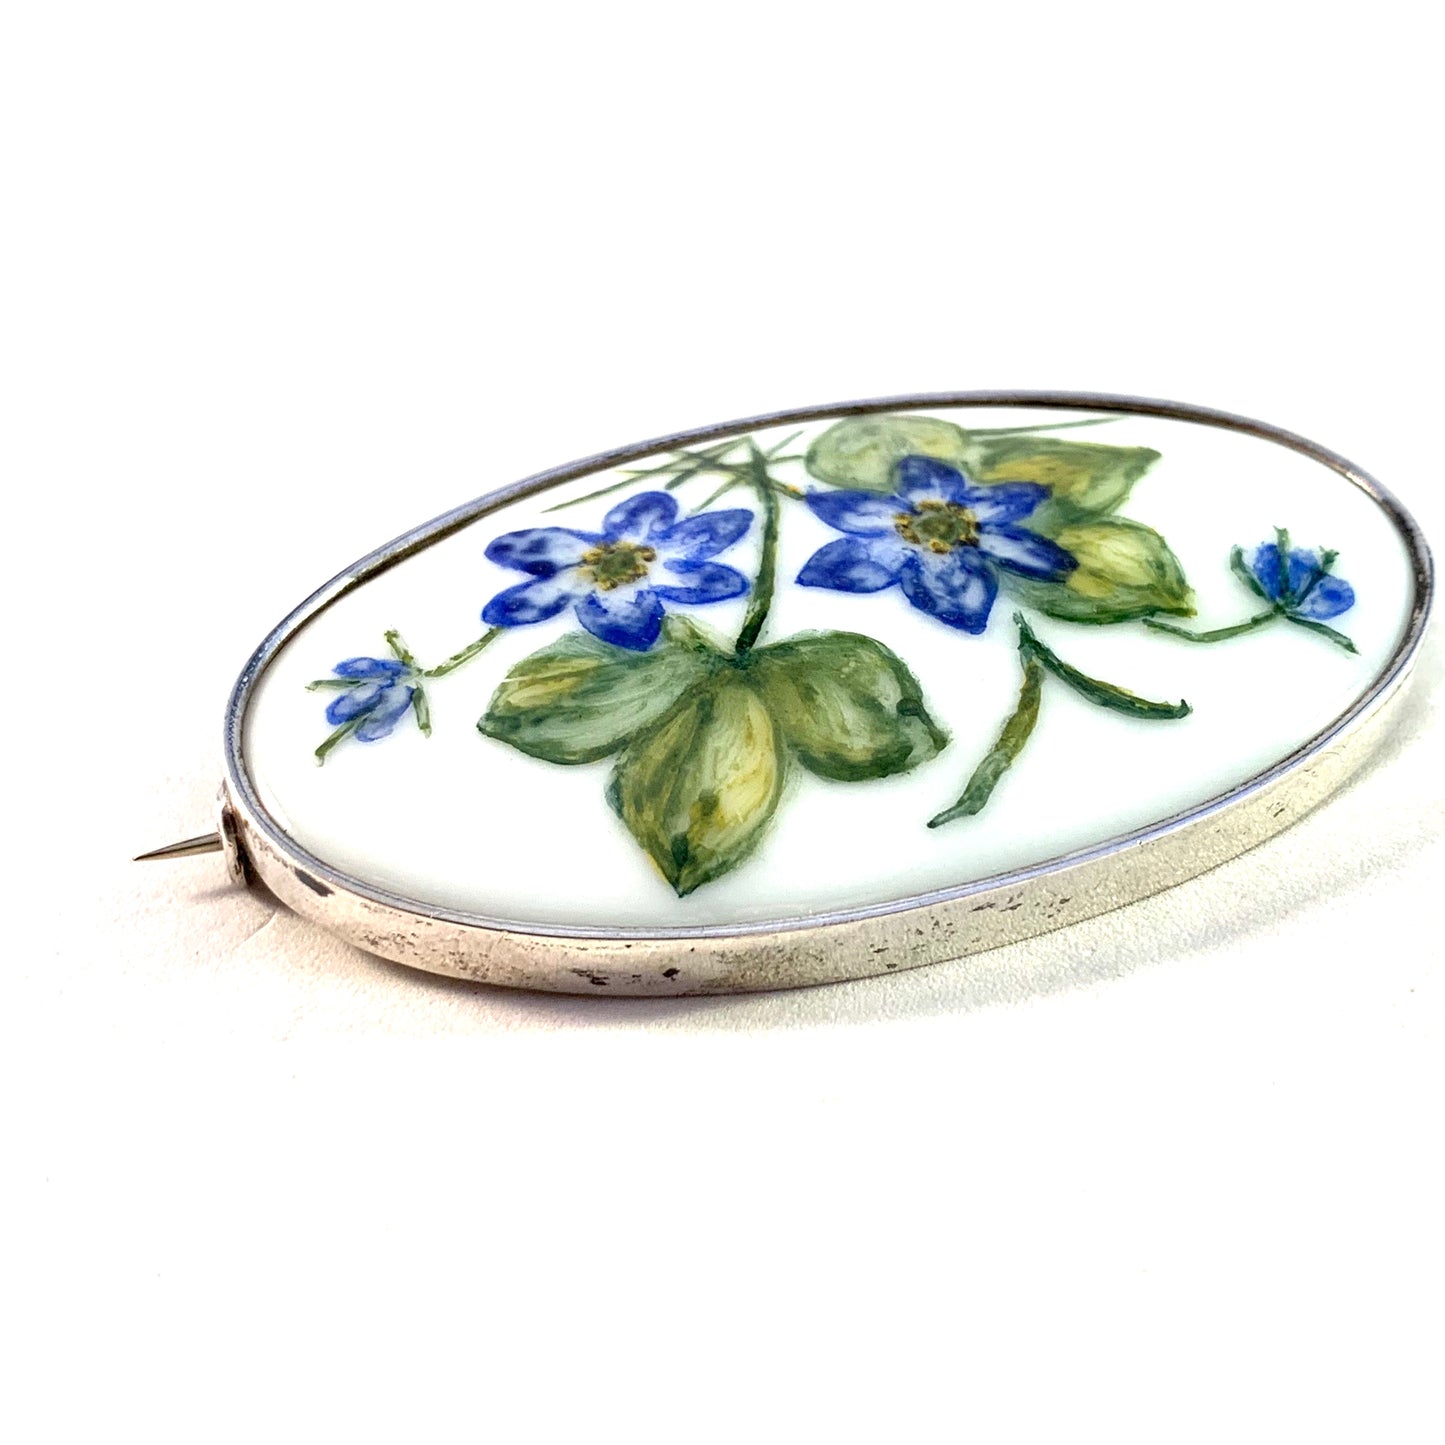 M Olofsson, Sweden year 1918. Large Antique Solid Silver Painted Porcelain Brooch.